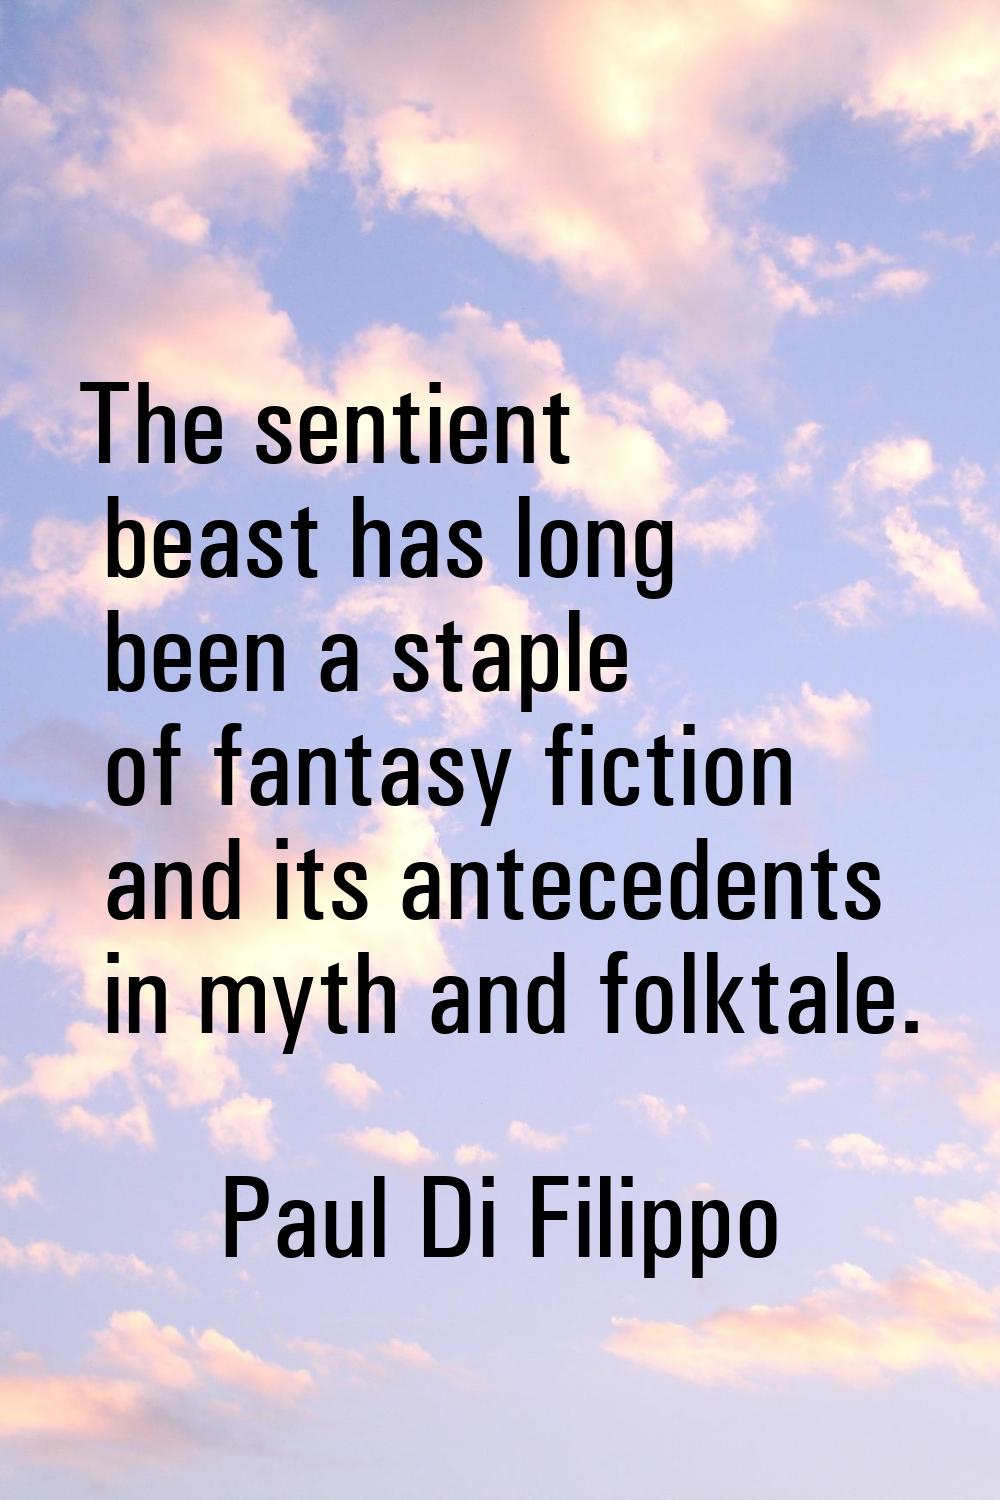 The sentient beast has long been a staple of fantasy fiction and its antecedents in myth and folkta